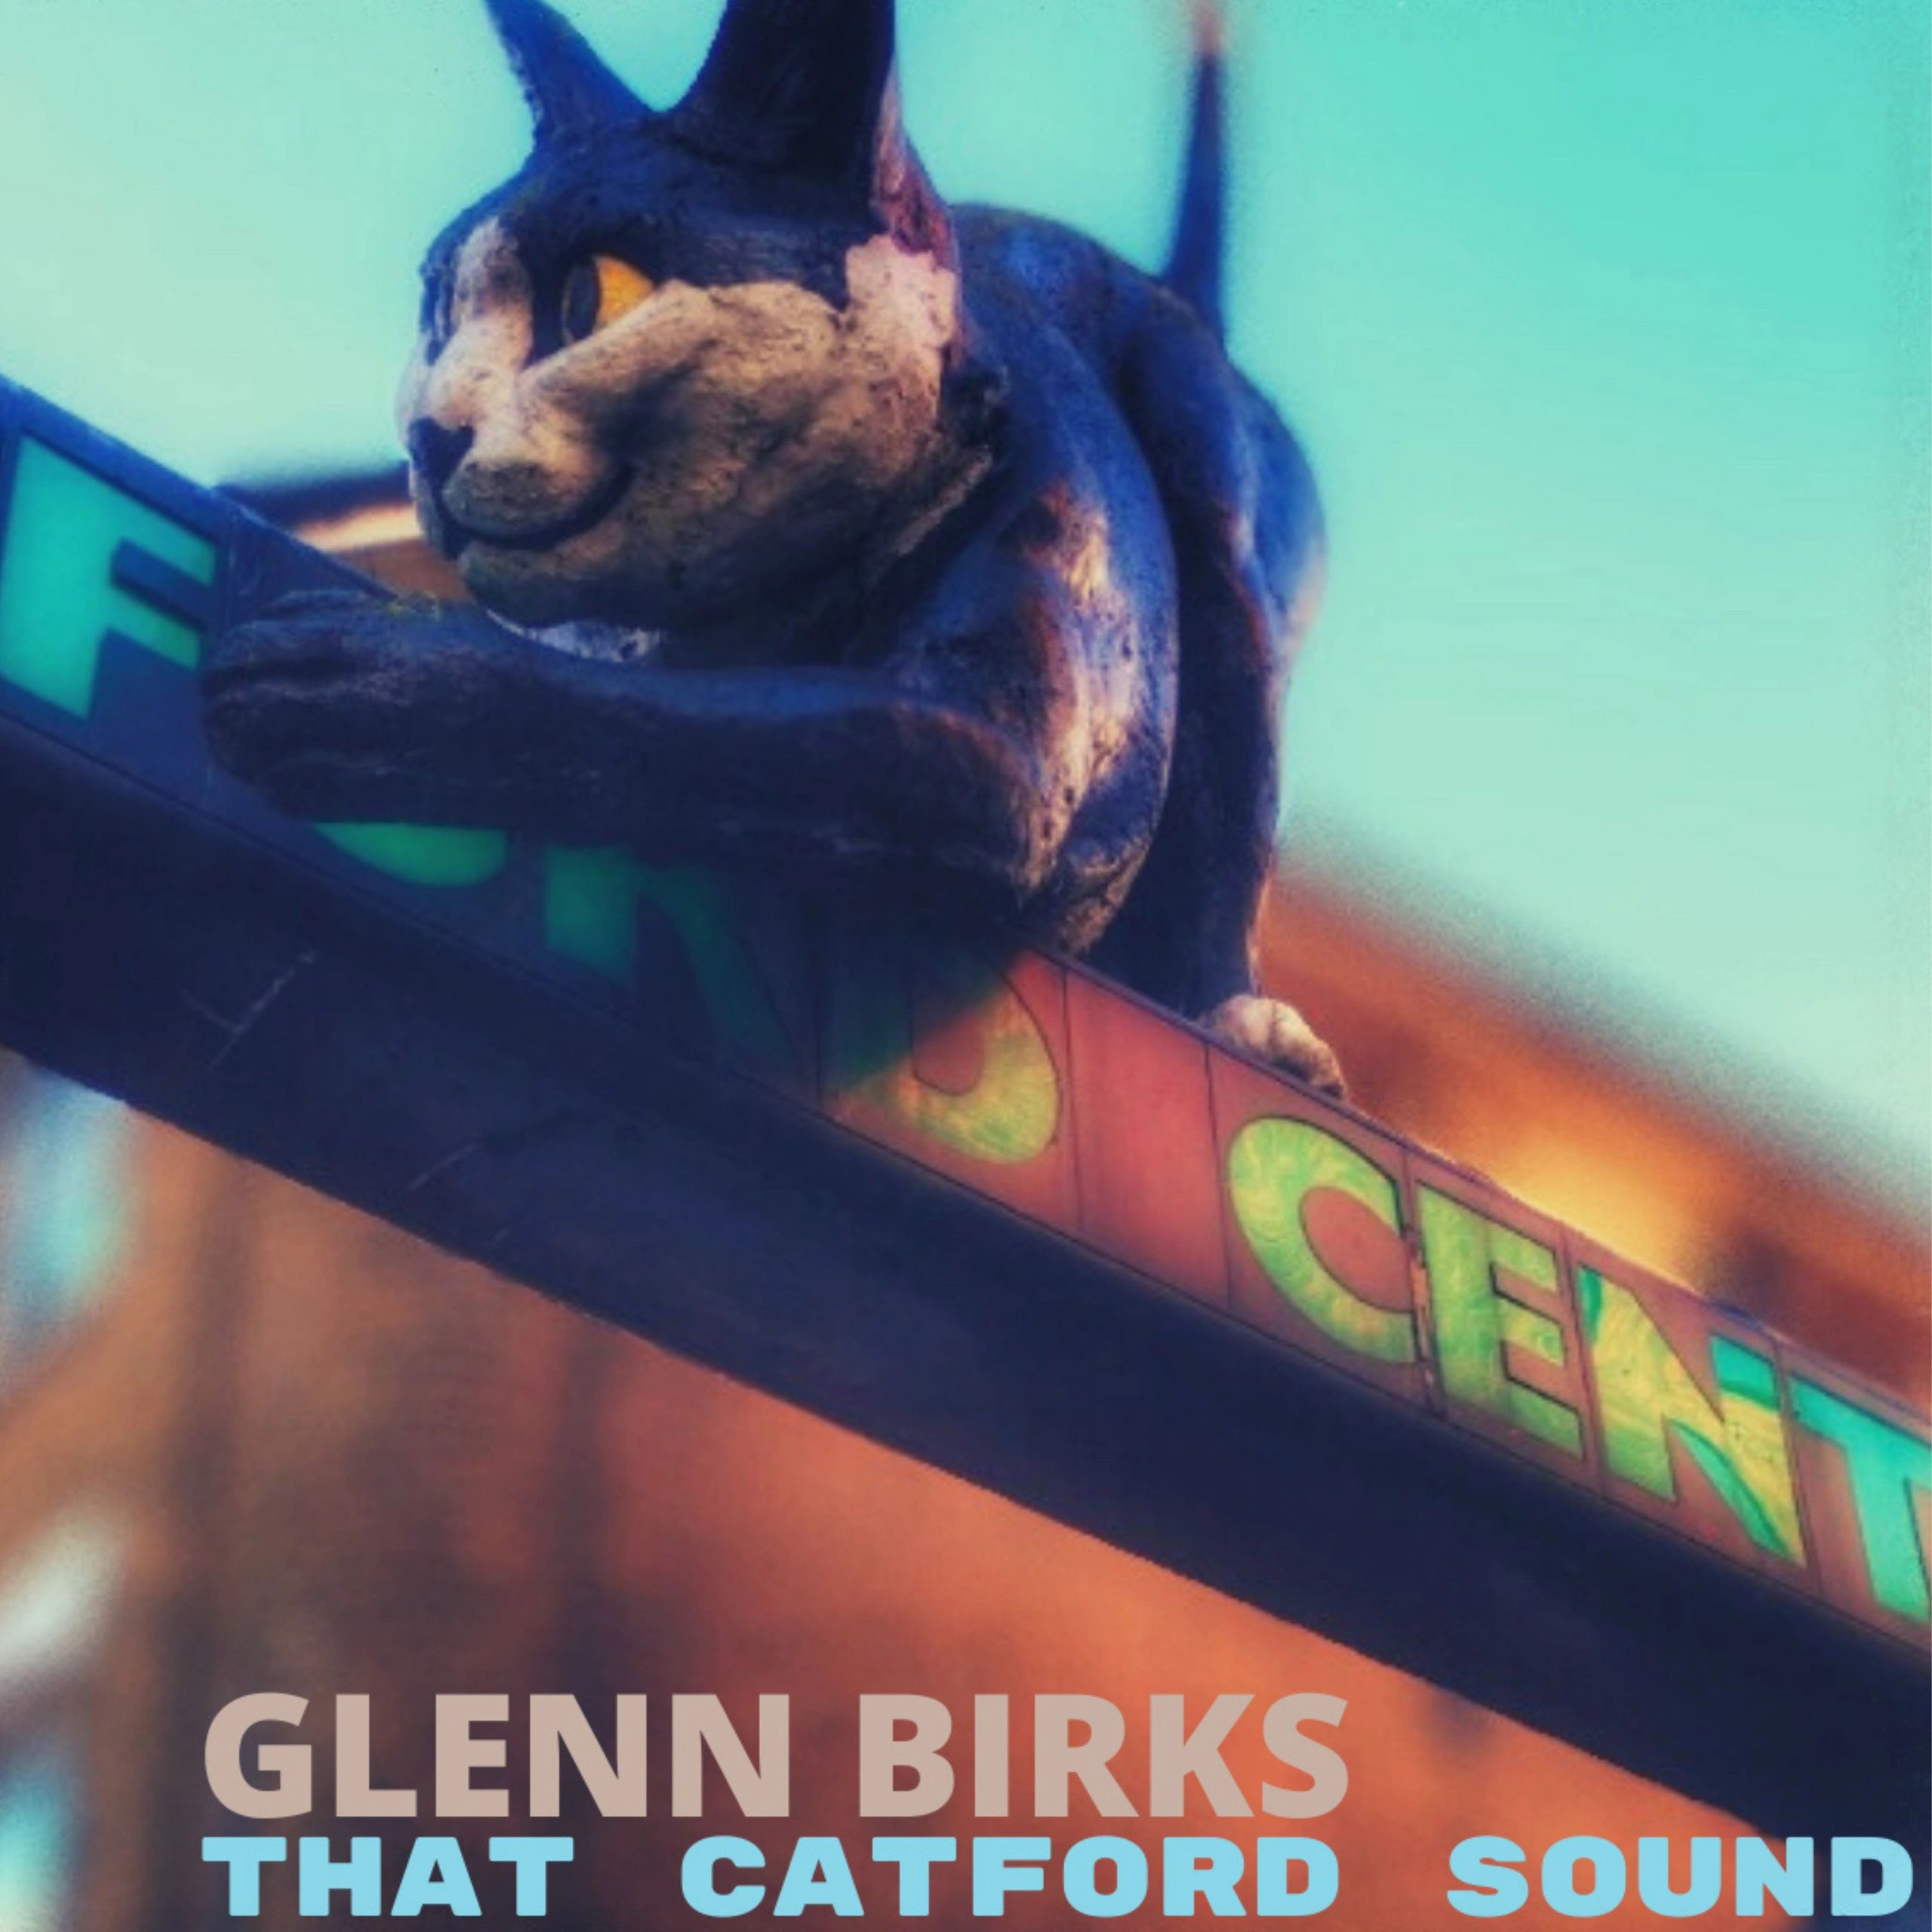 Welcome to Catford Studios, Glenns’ Record Label that releases all of his solo work.